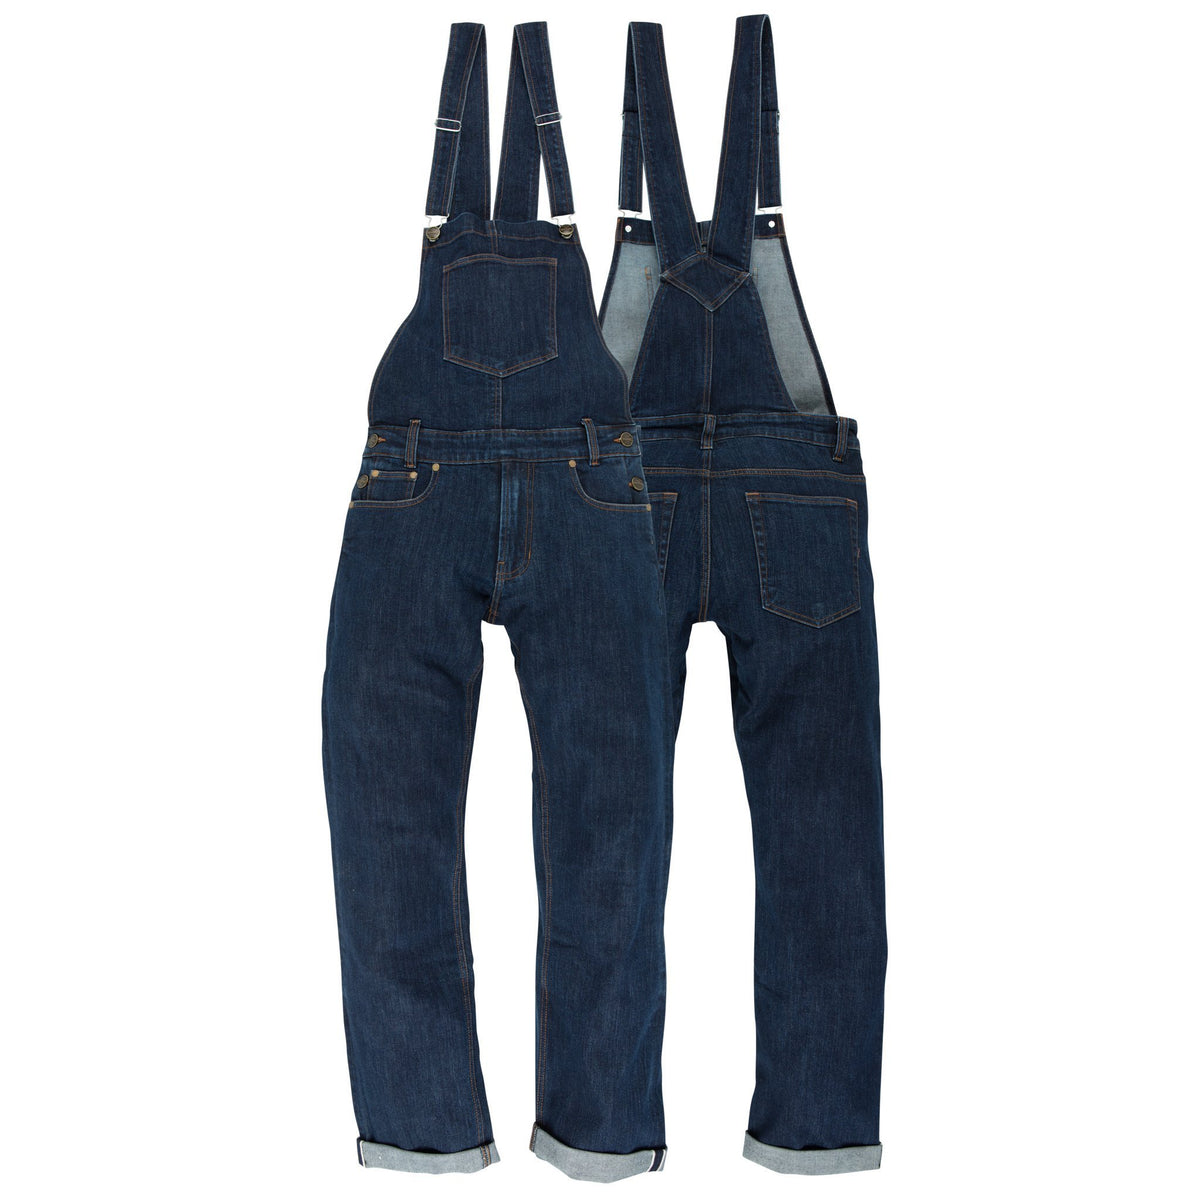 selvedge dungarees